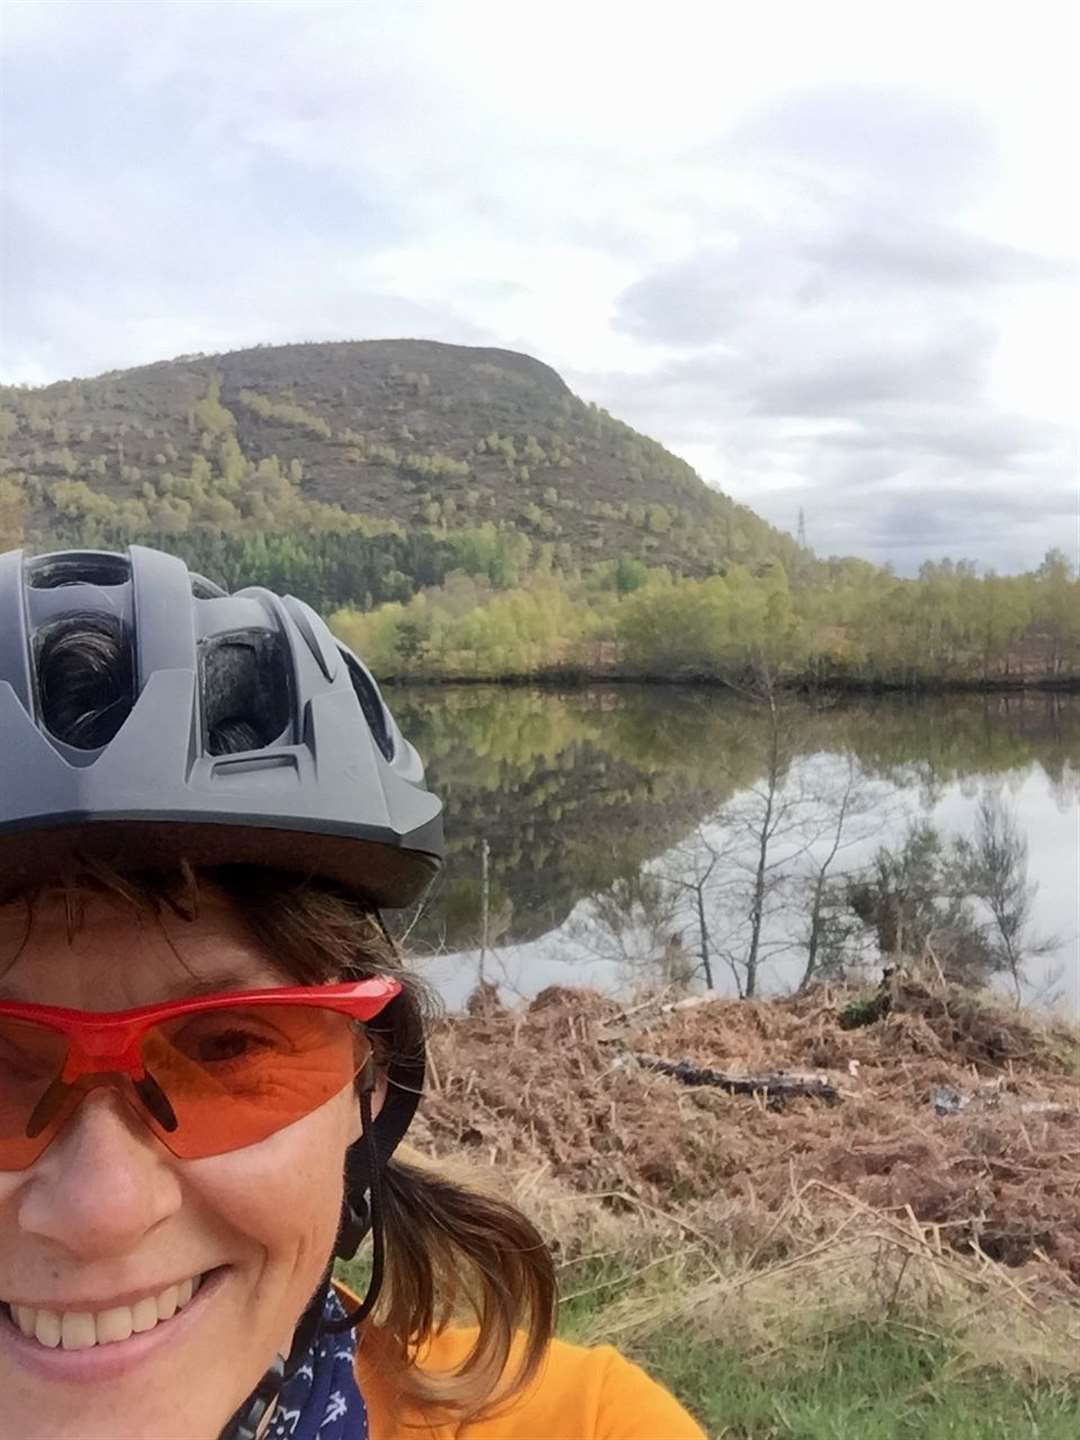 Nicky out on her bike in Strathconon.